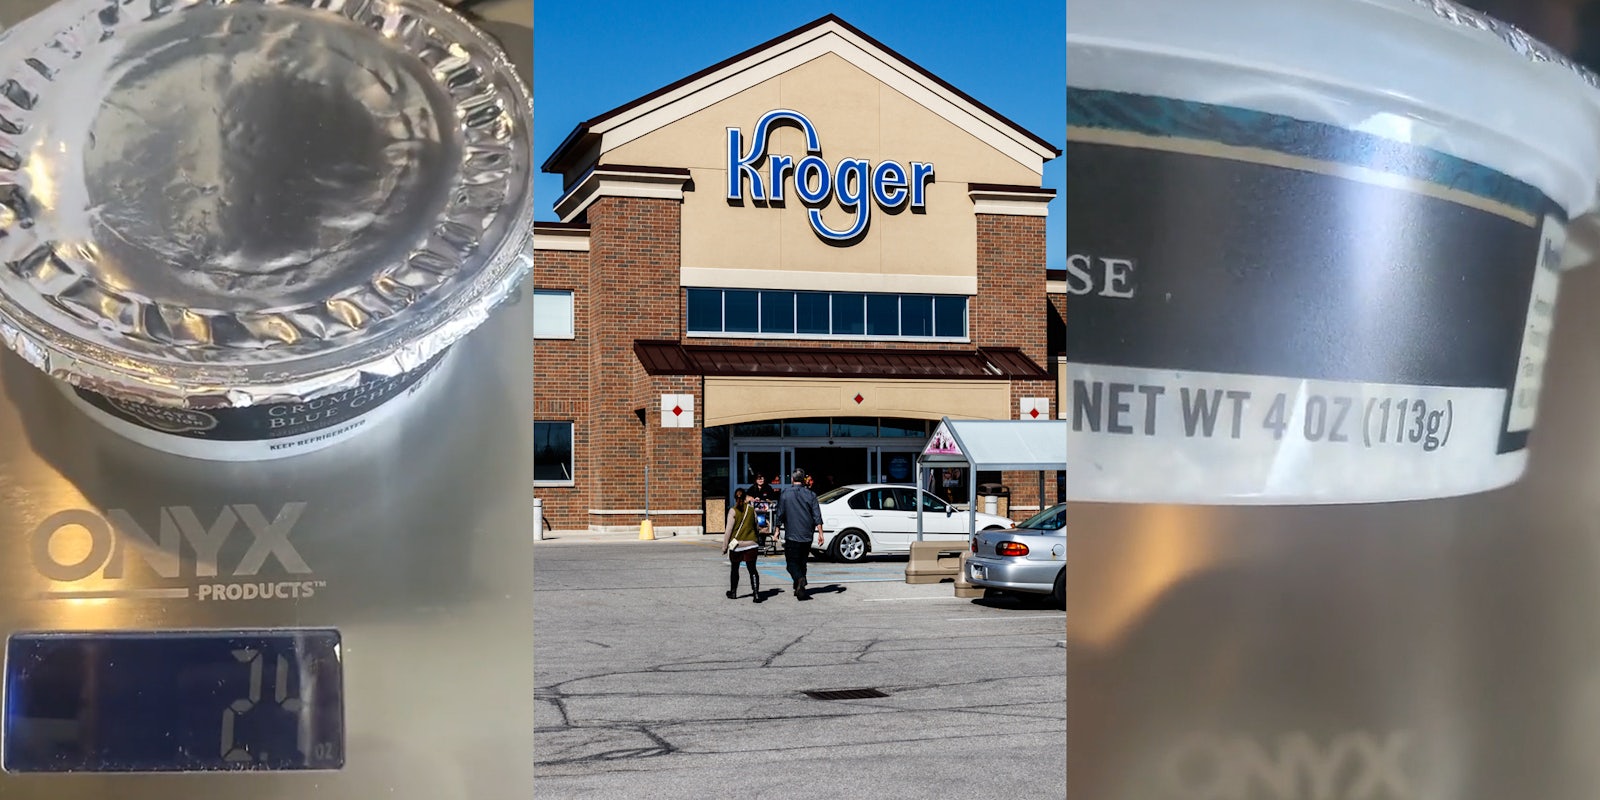 Kroger blue cheese in container on scale reading '2.4OZ' (l) Kroger building with sign and parking lot (c) Kroger blue cheese label on container reads '4 OZ (113g)' (r)